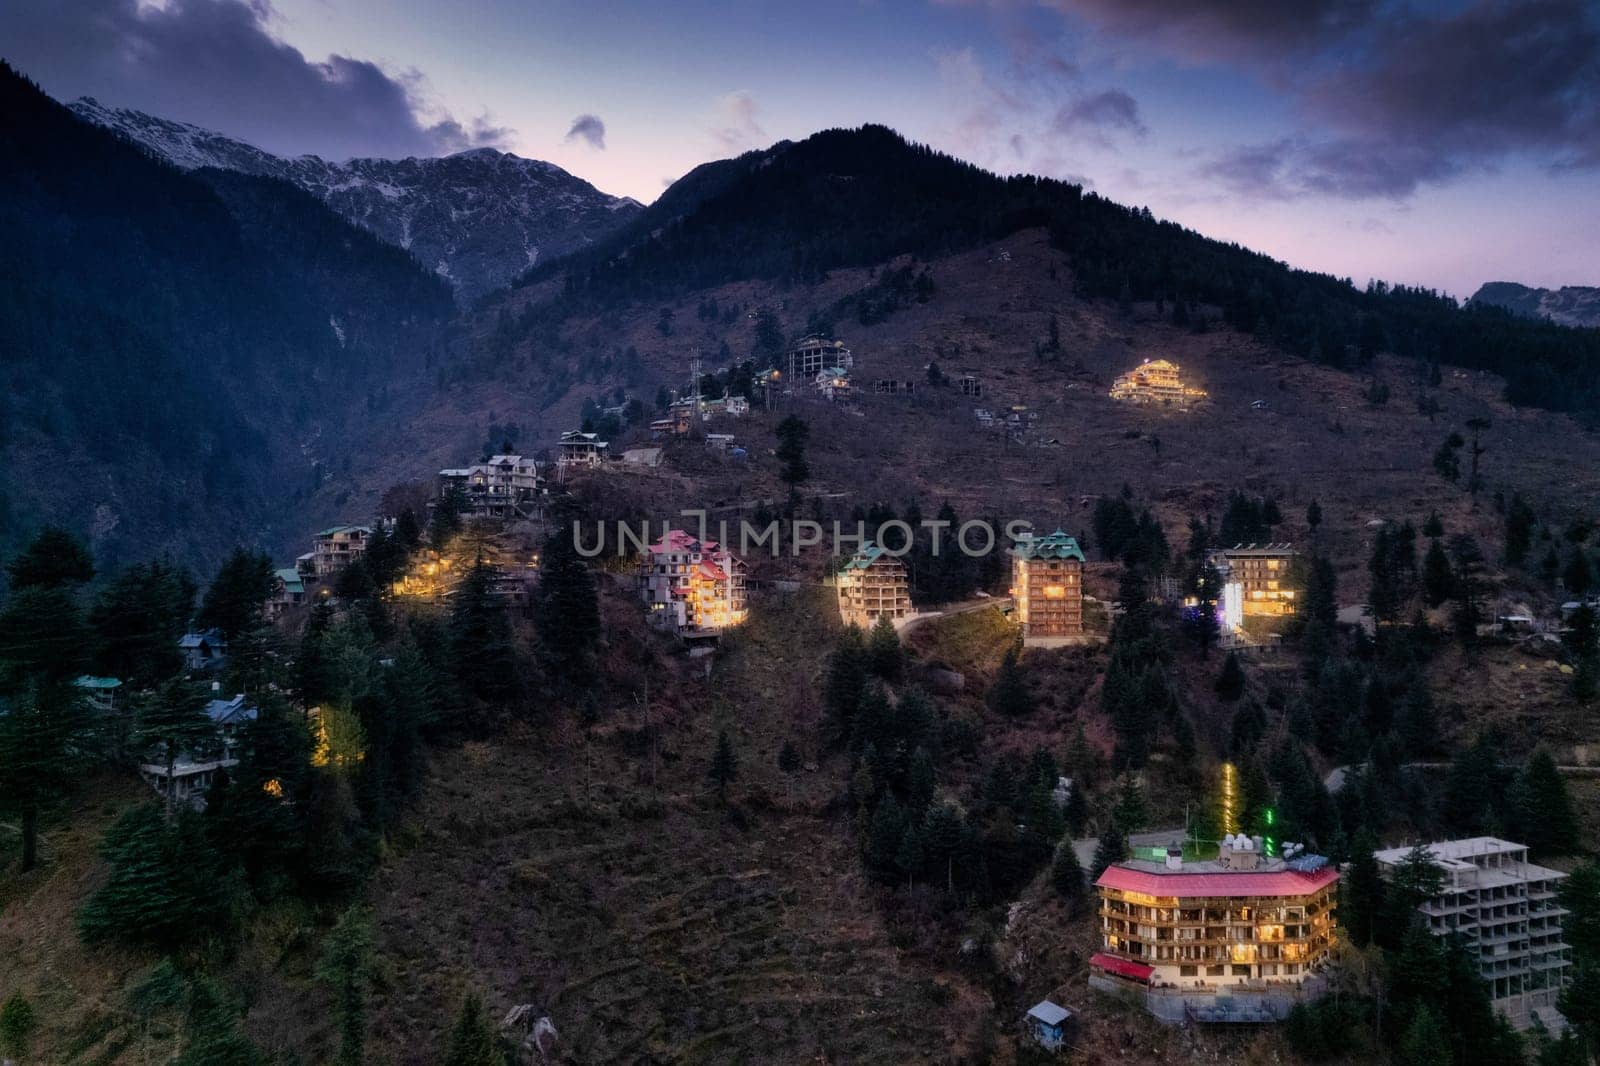 aerial drone landing shot showing lit multi floor story buildings on side of hill at night evening showing hotels shopping areas in manali, shimla himachal India